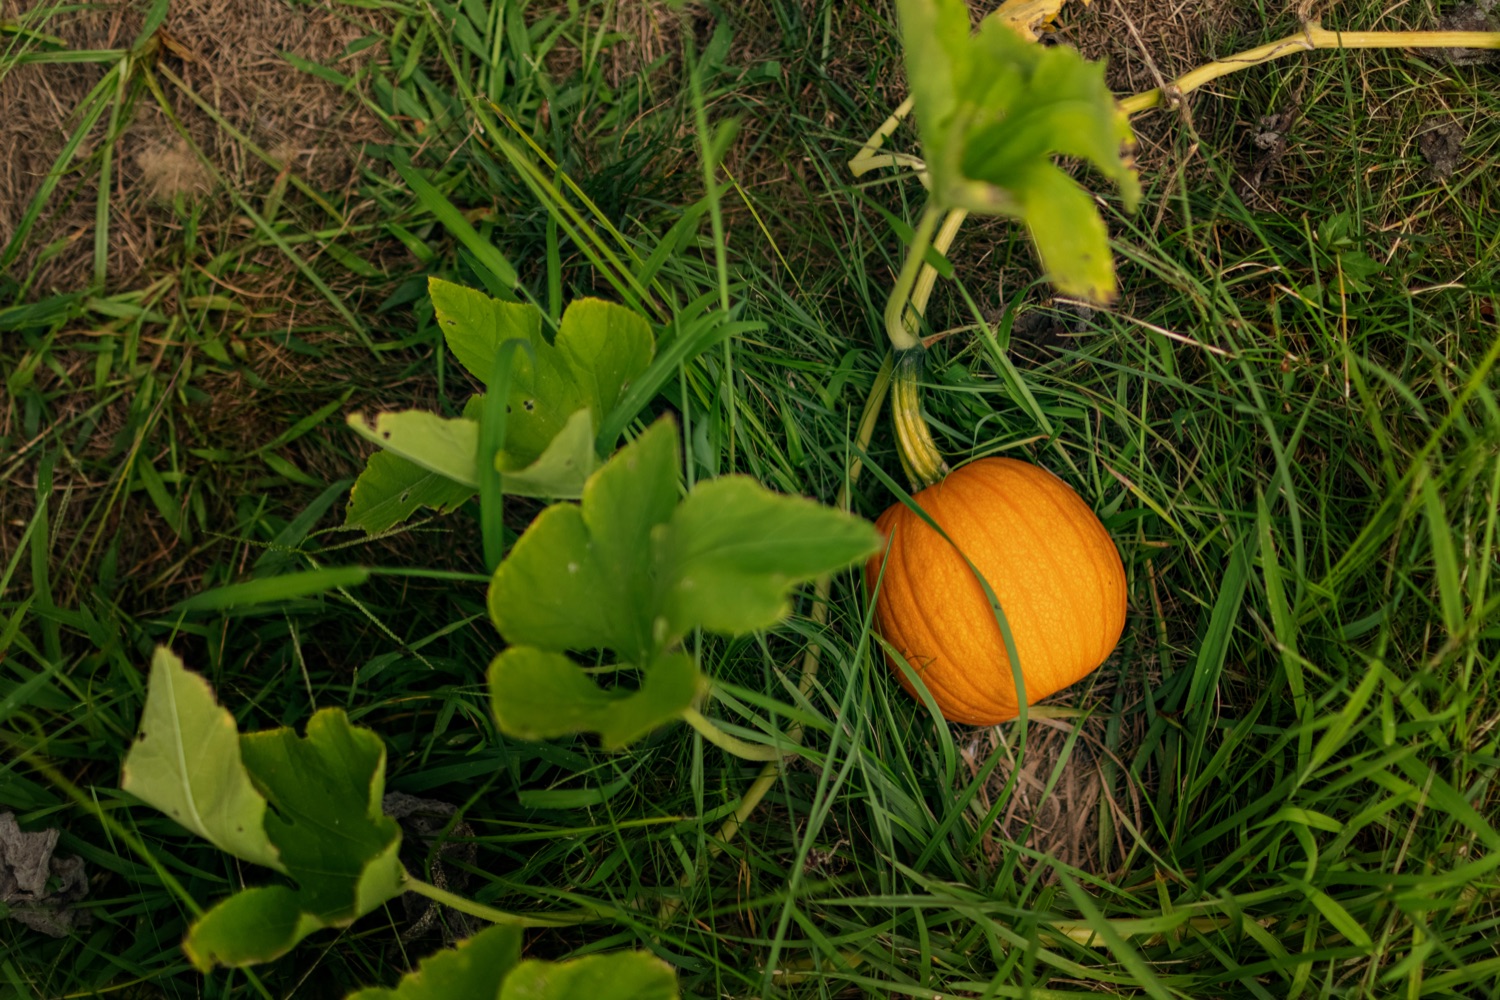 A pumpkin is pictured at Hill Top Academy in Mechanicsburg on Friday, August 27, 2021.<br><a href="https://filesource.amperwave.net/commonwealthofpa/photo/19054_AGRIC_FarmToSchool_NK_007.jpg" target="_blank">⇣ Download Photo</a>